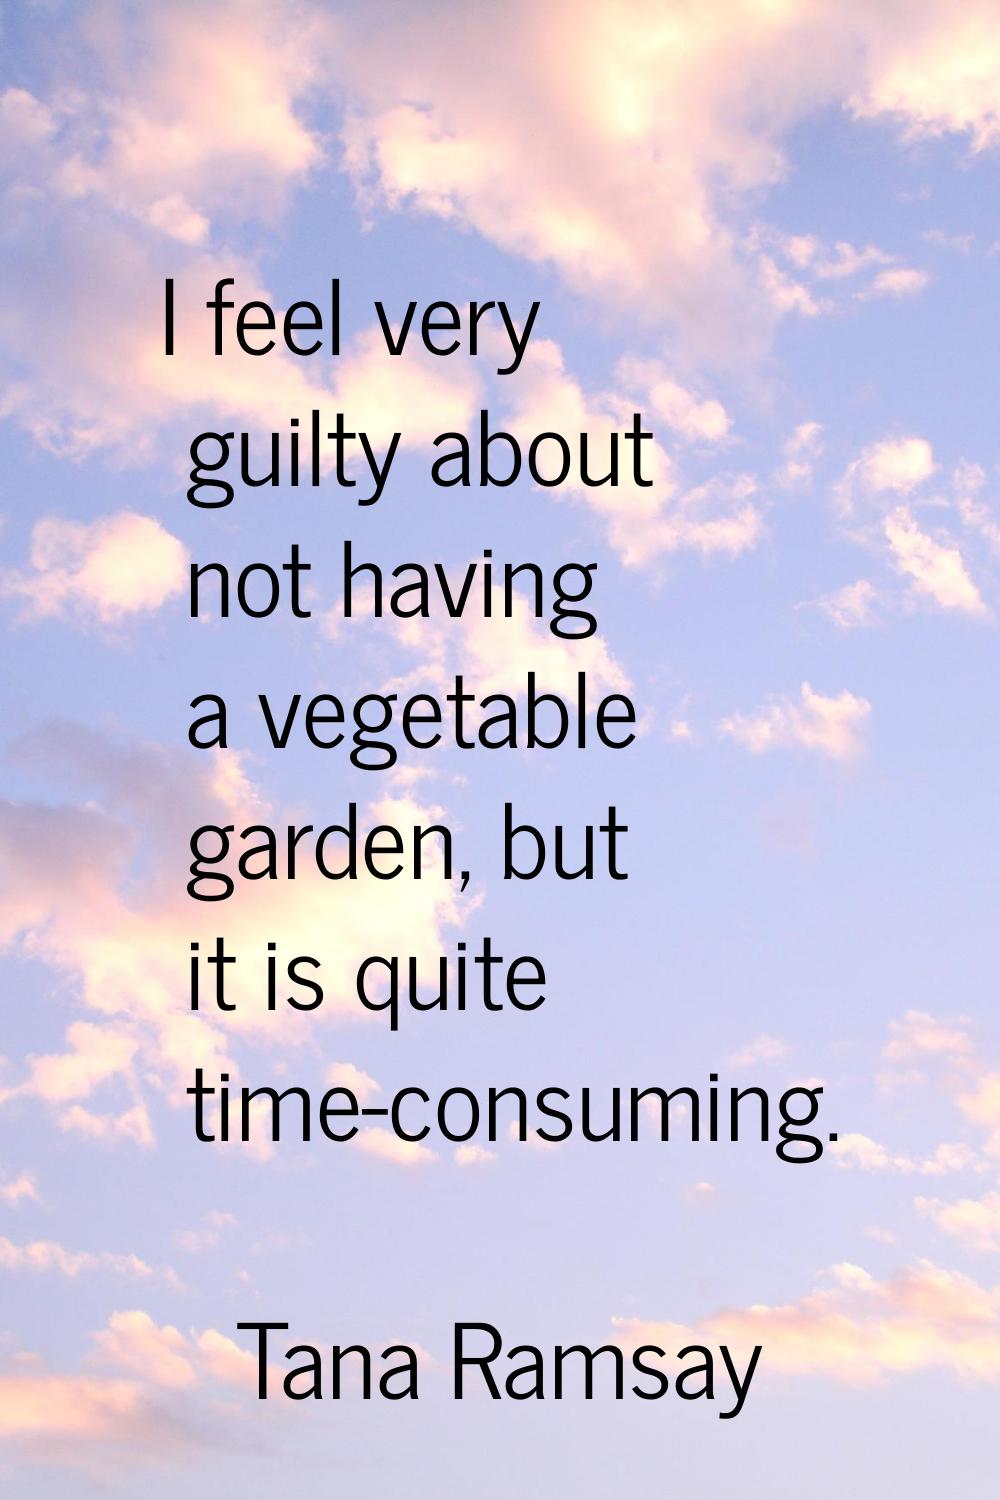 I feel very guilty about not having a vegetable garden, but it is quite time-consuming.